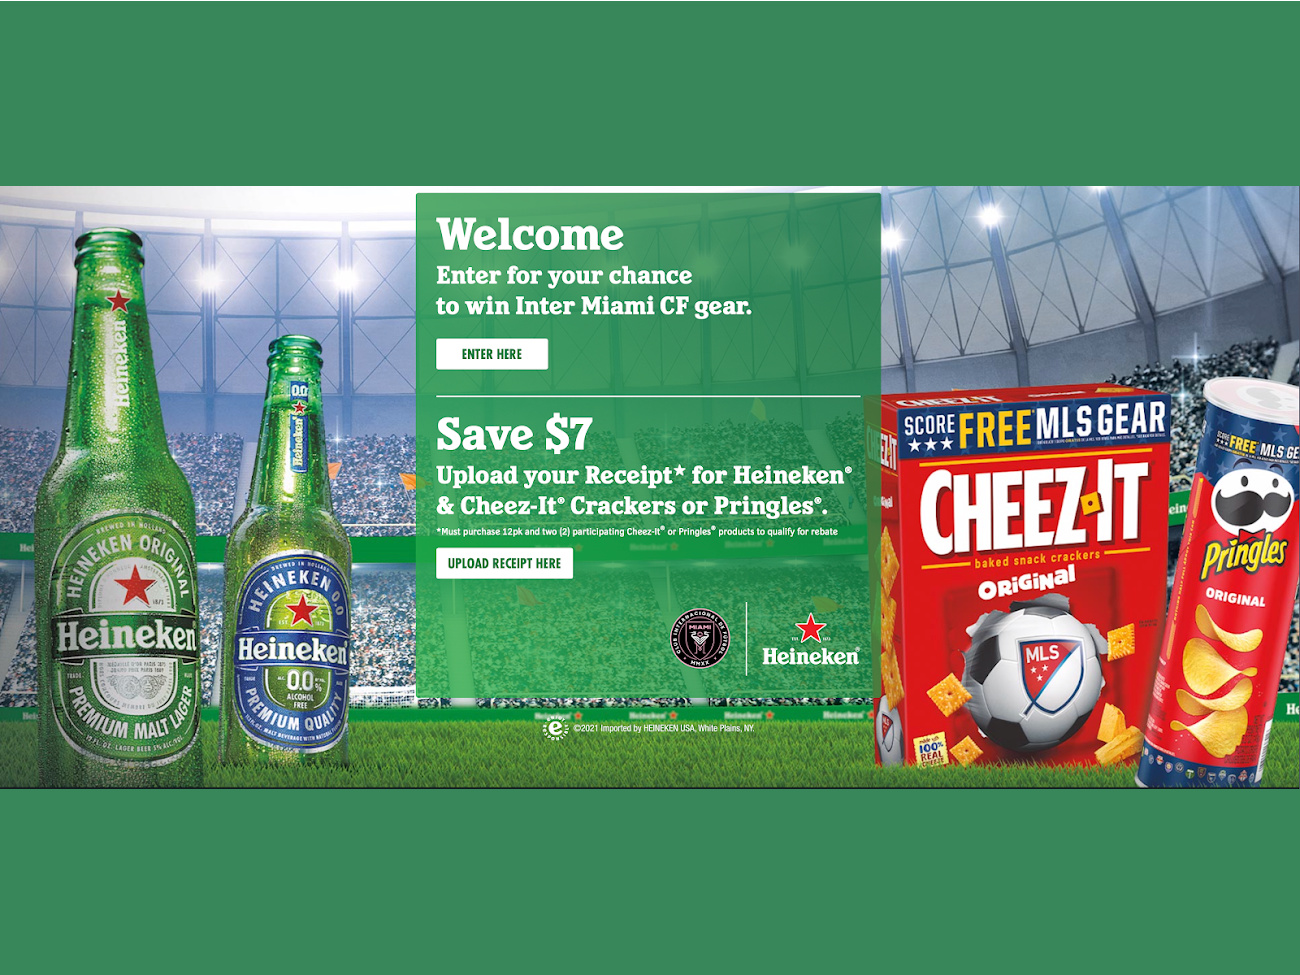 Florida Folks - Purchase Heineken And Cheez-It Or Pringles And Save $7 (Plus Enter To Win Inter Miami CF Gear) on I Heart Publix